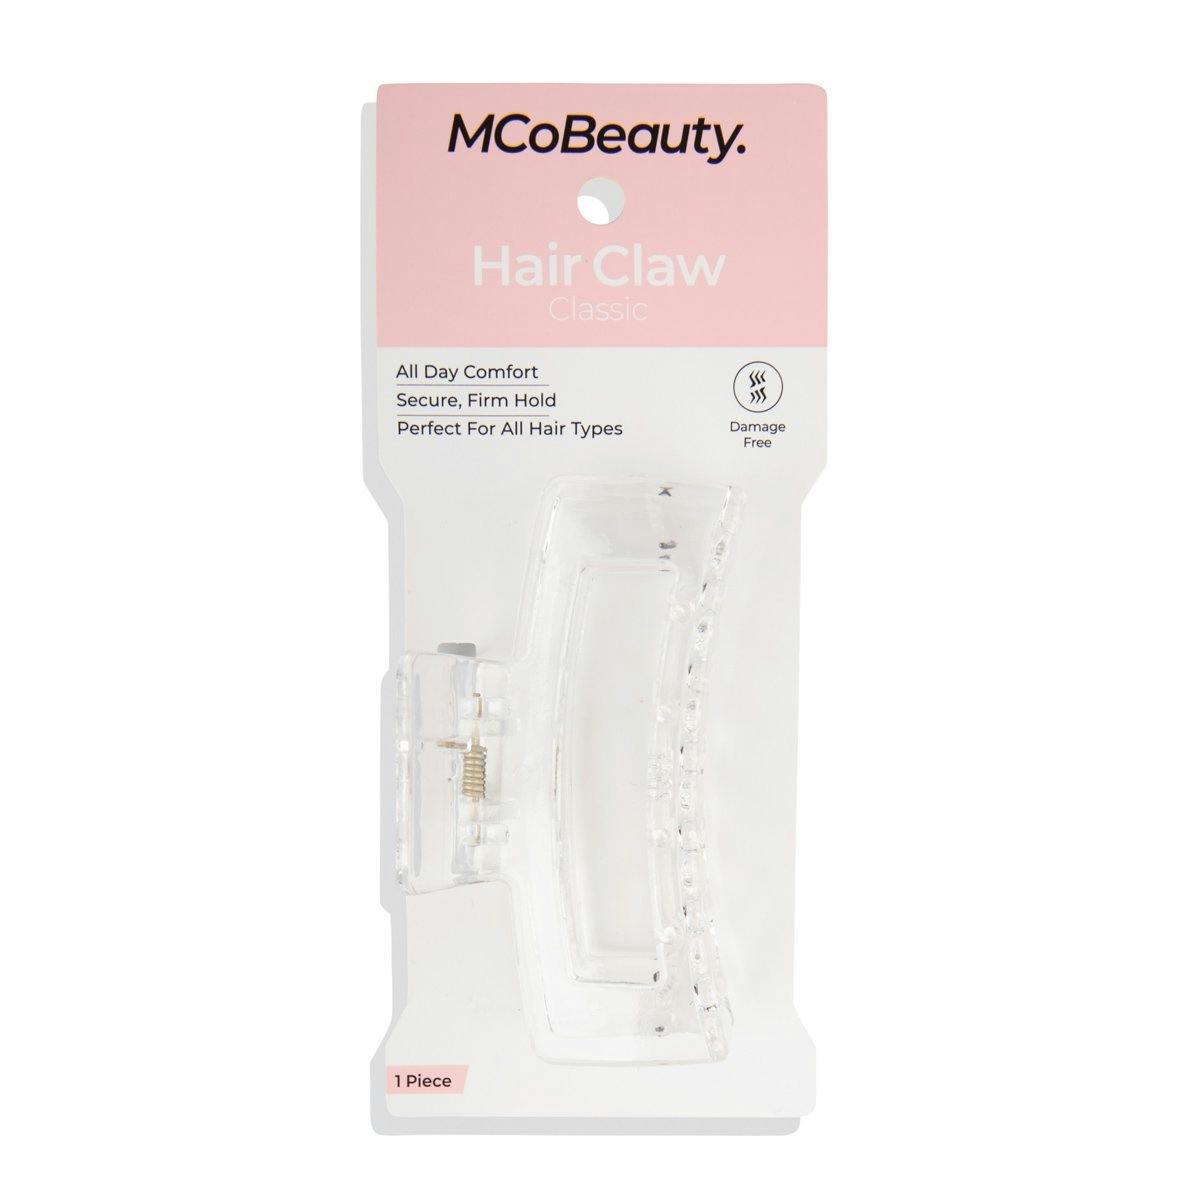 MCoBeauty Hair Claw Square Assorted*